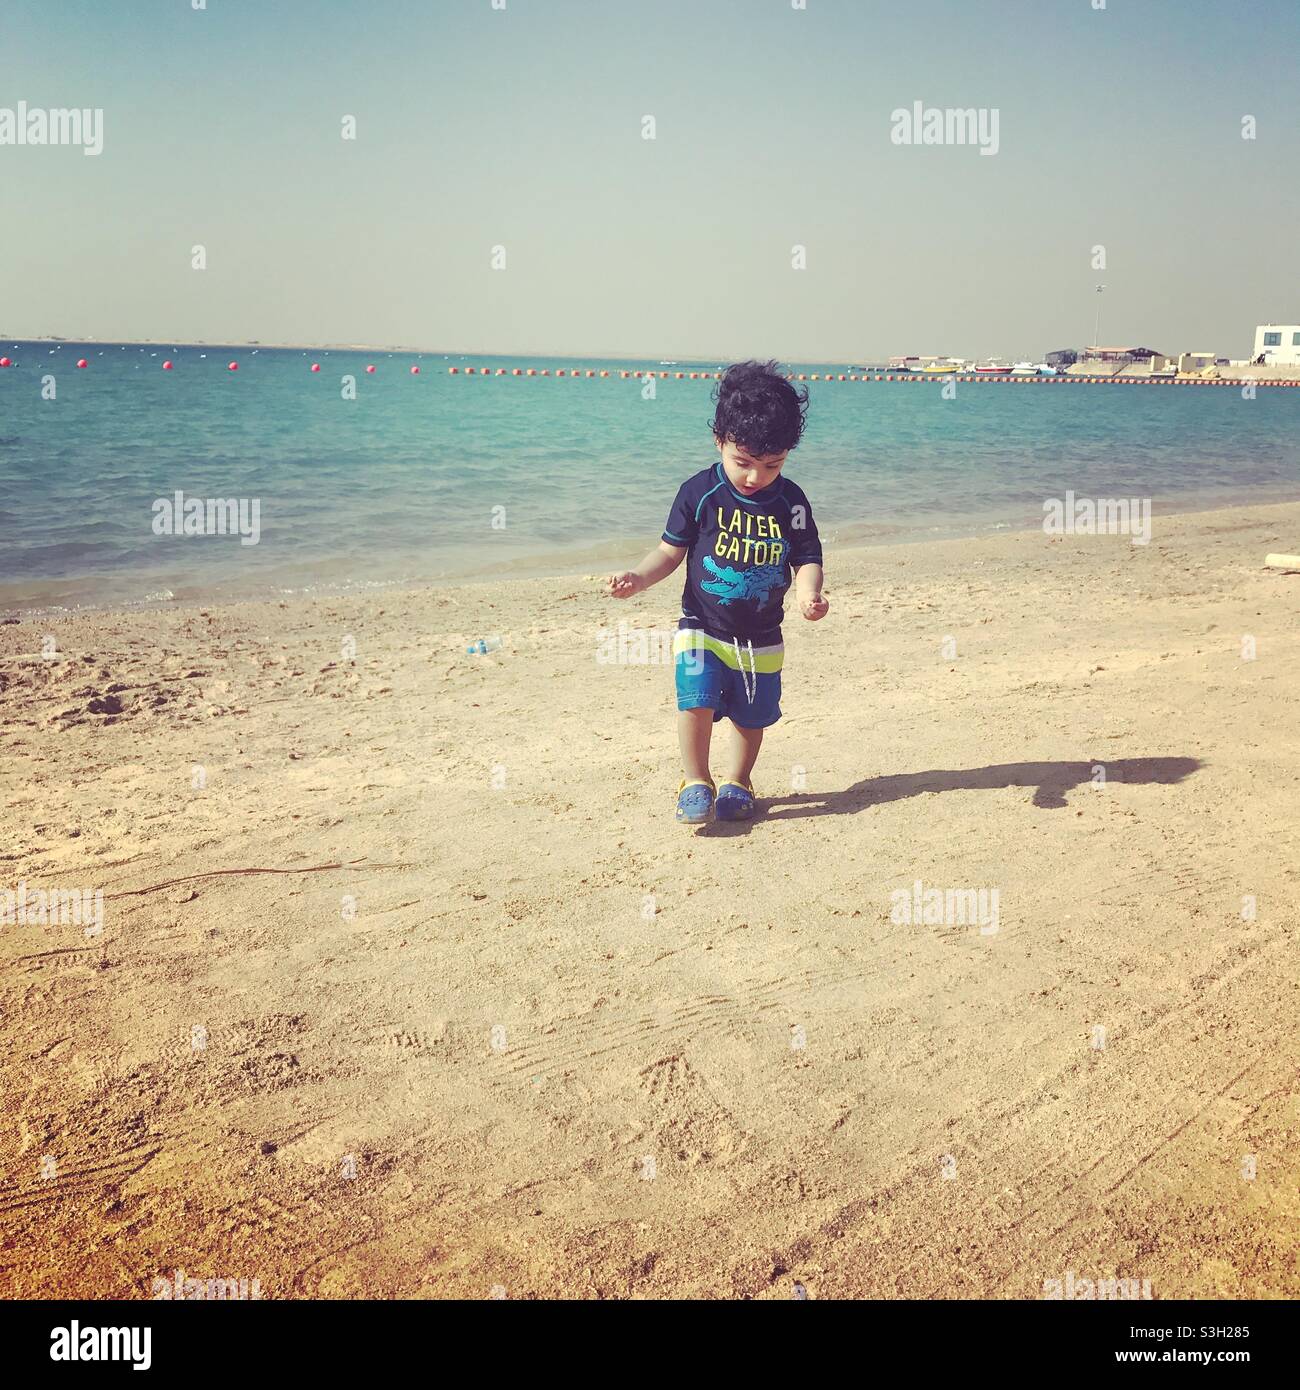 The boy was walking on the beach in Jeddah city. Stock Photo